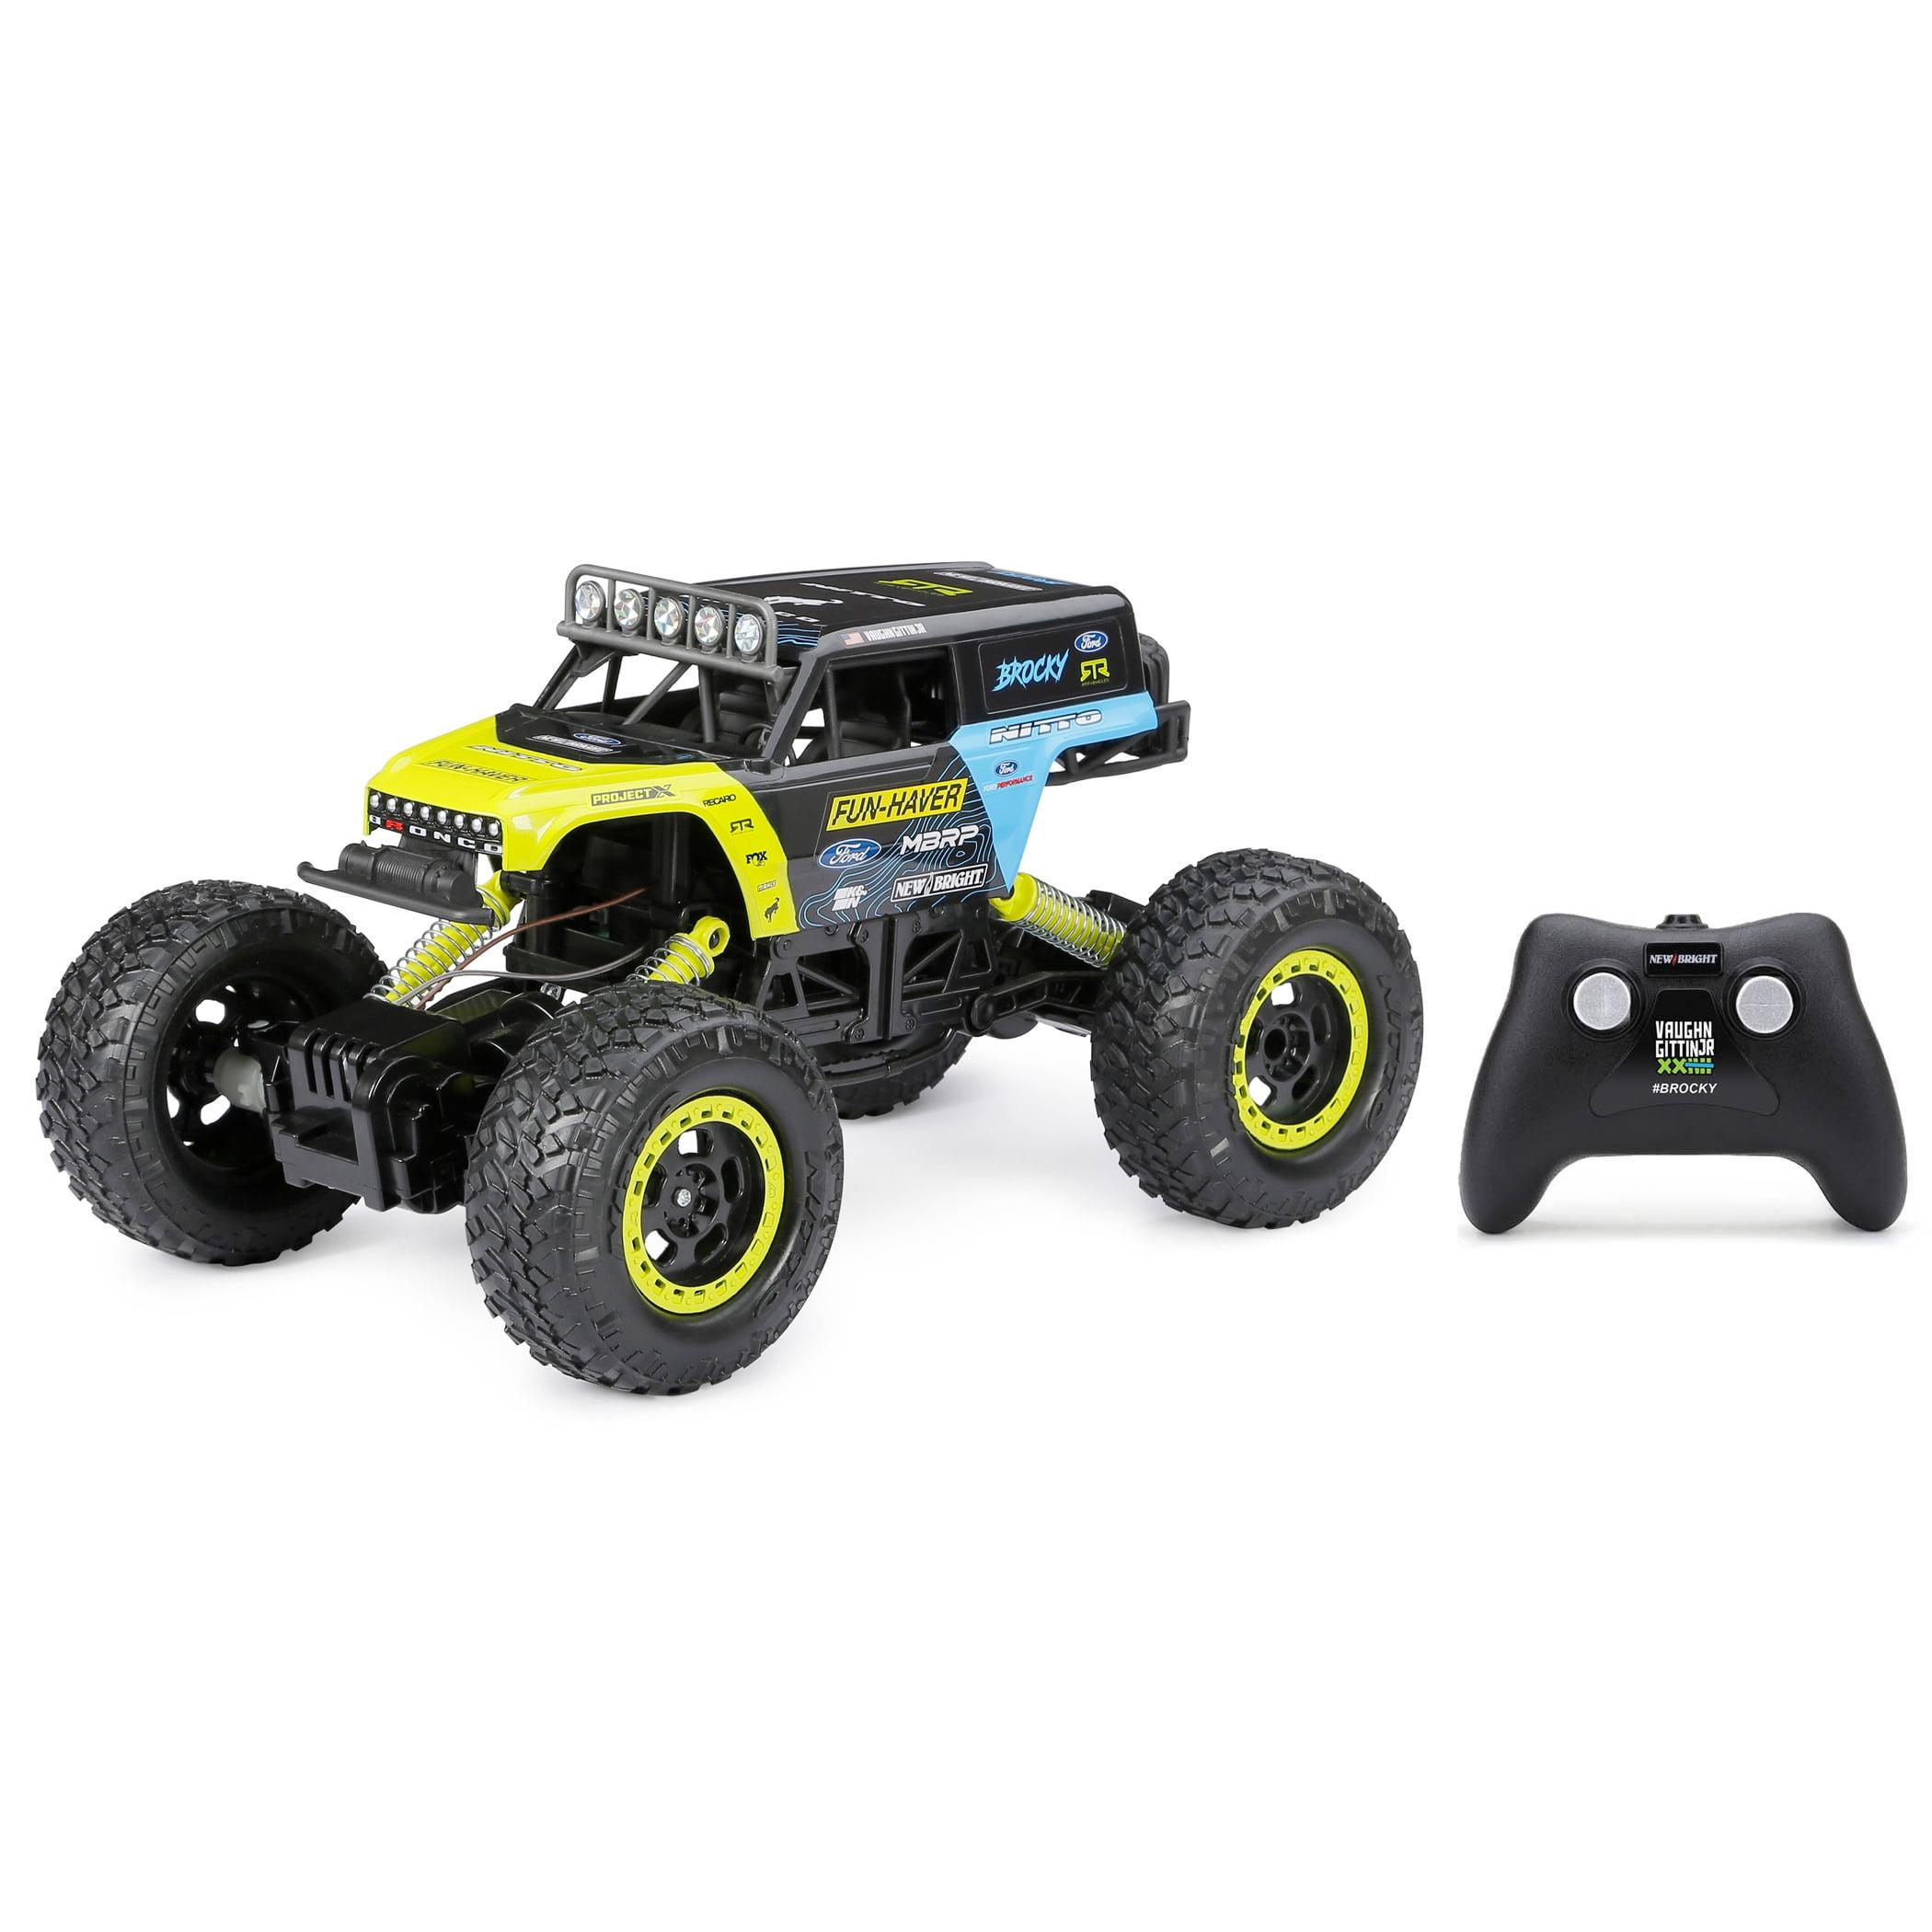 Remote Control Rock Crawler 4X4:  Safety first!